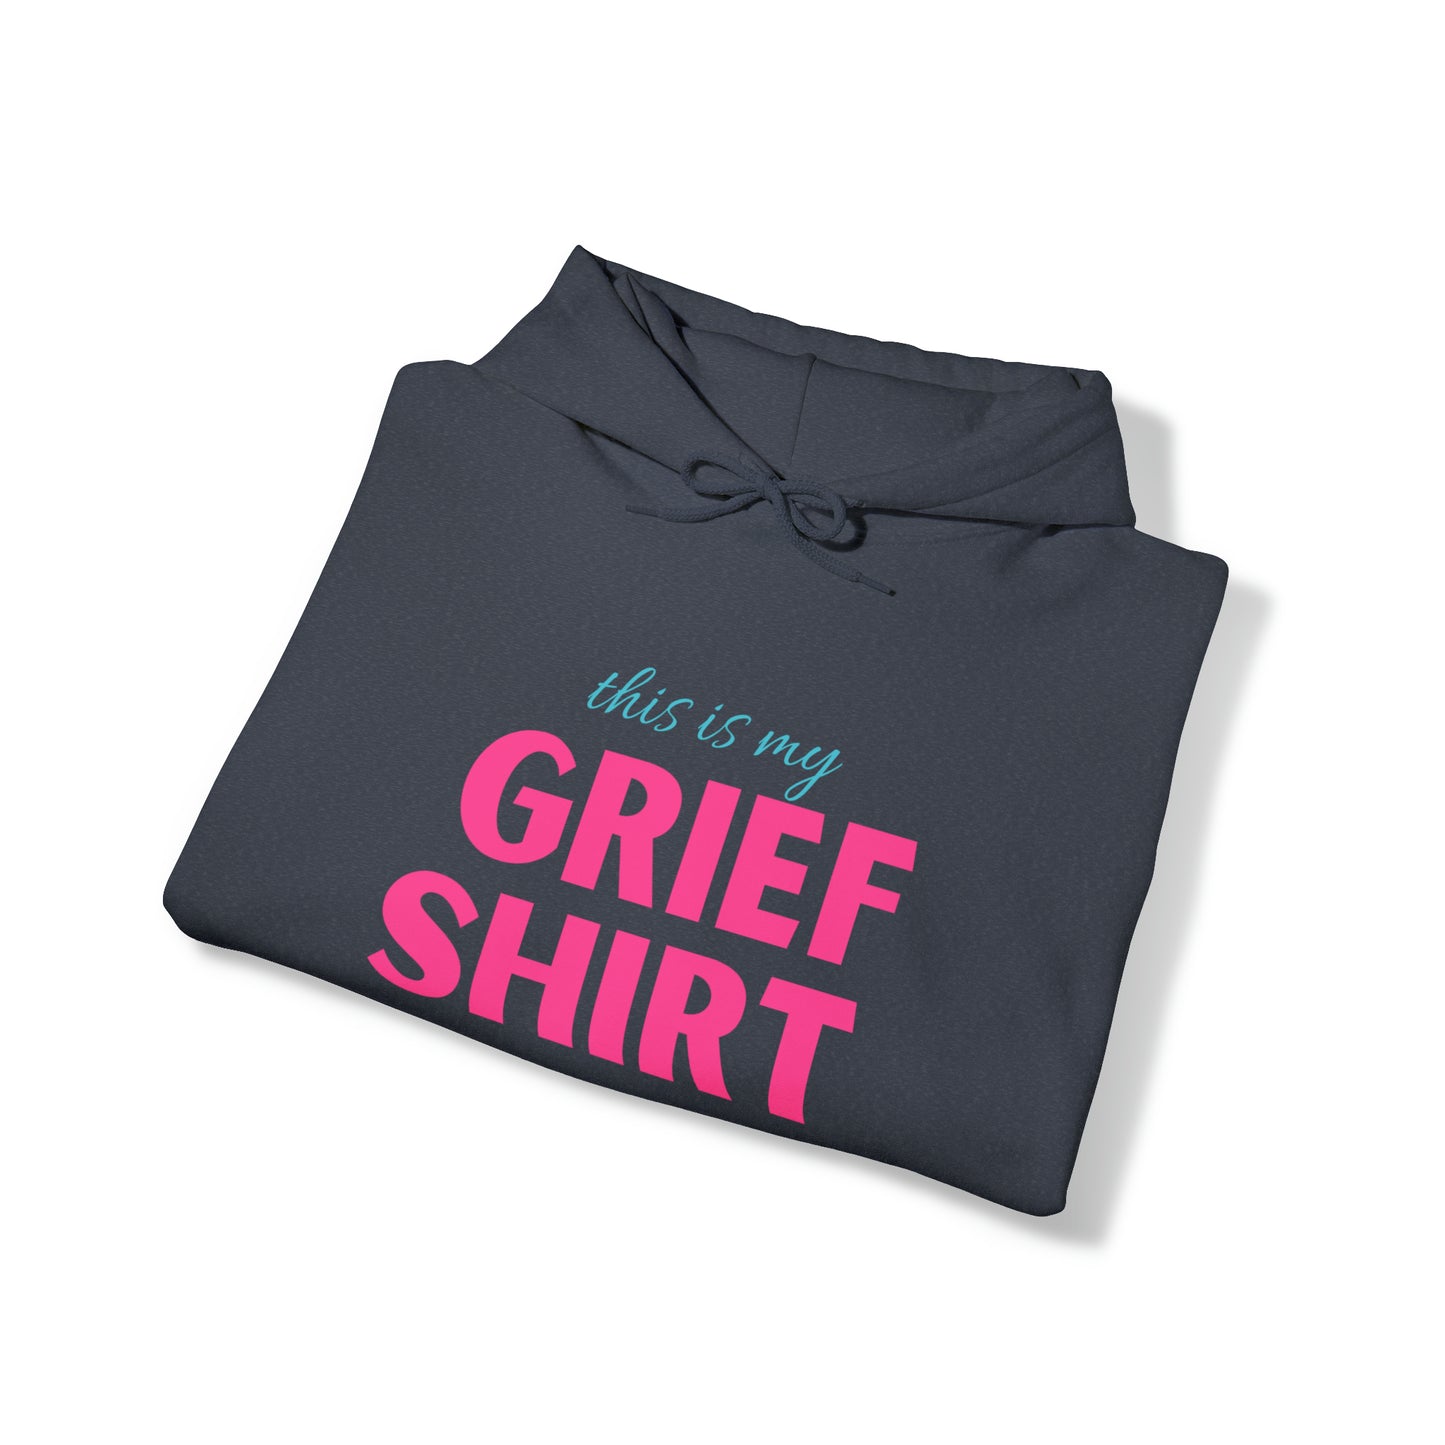 This is My Grief Shirt Hoodie